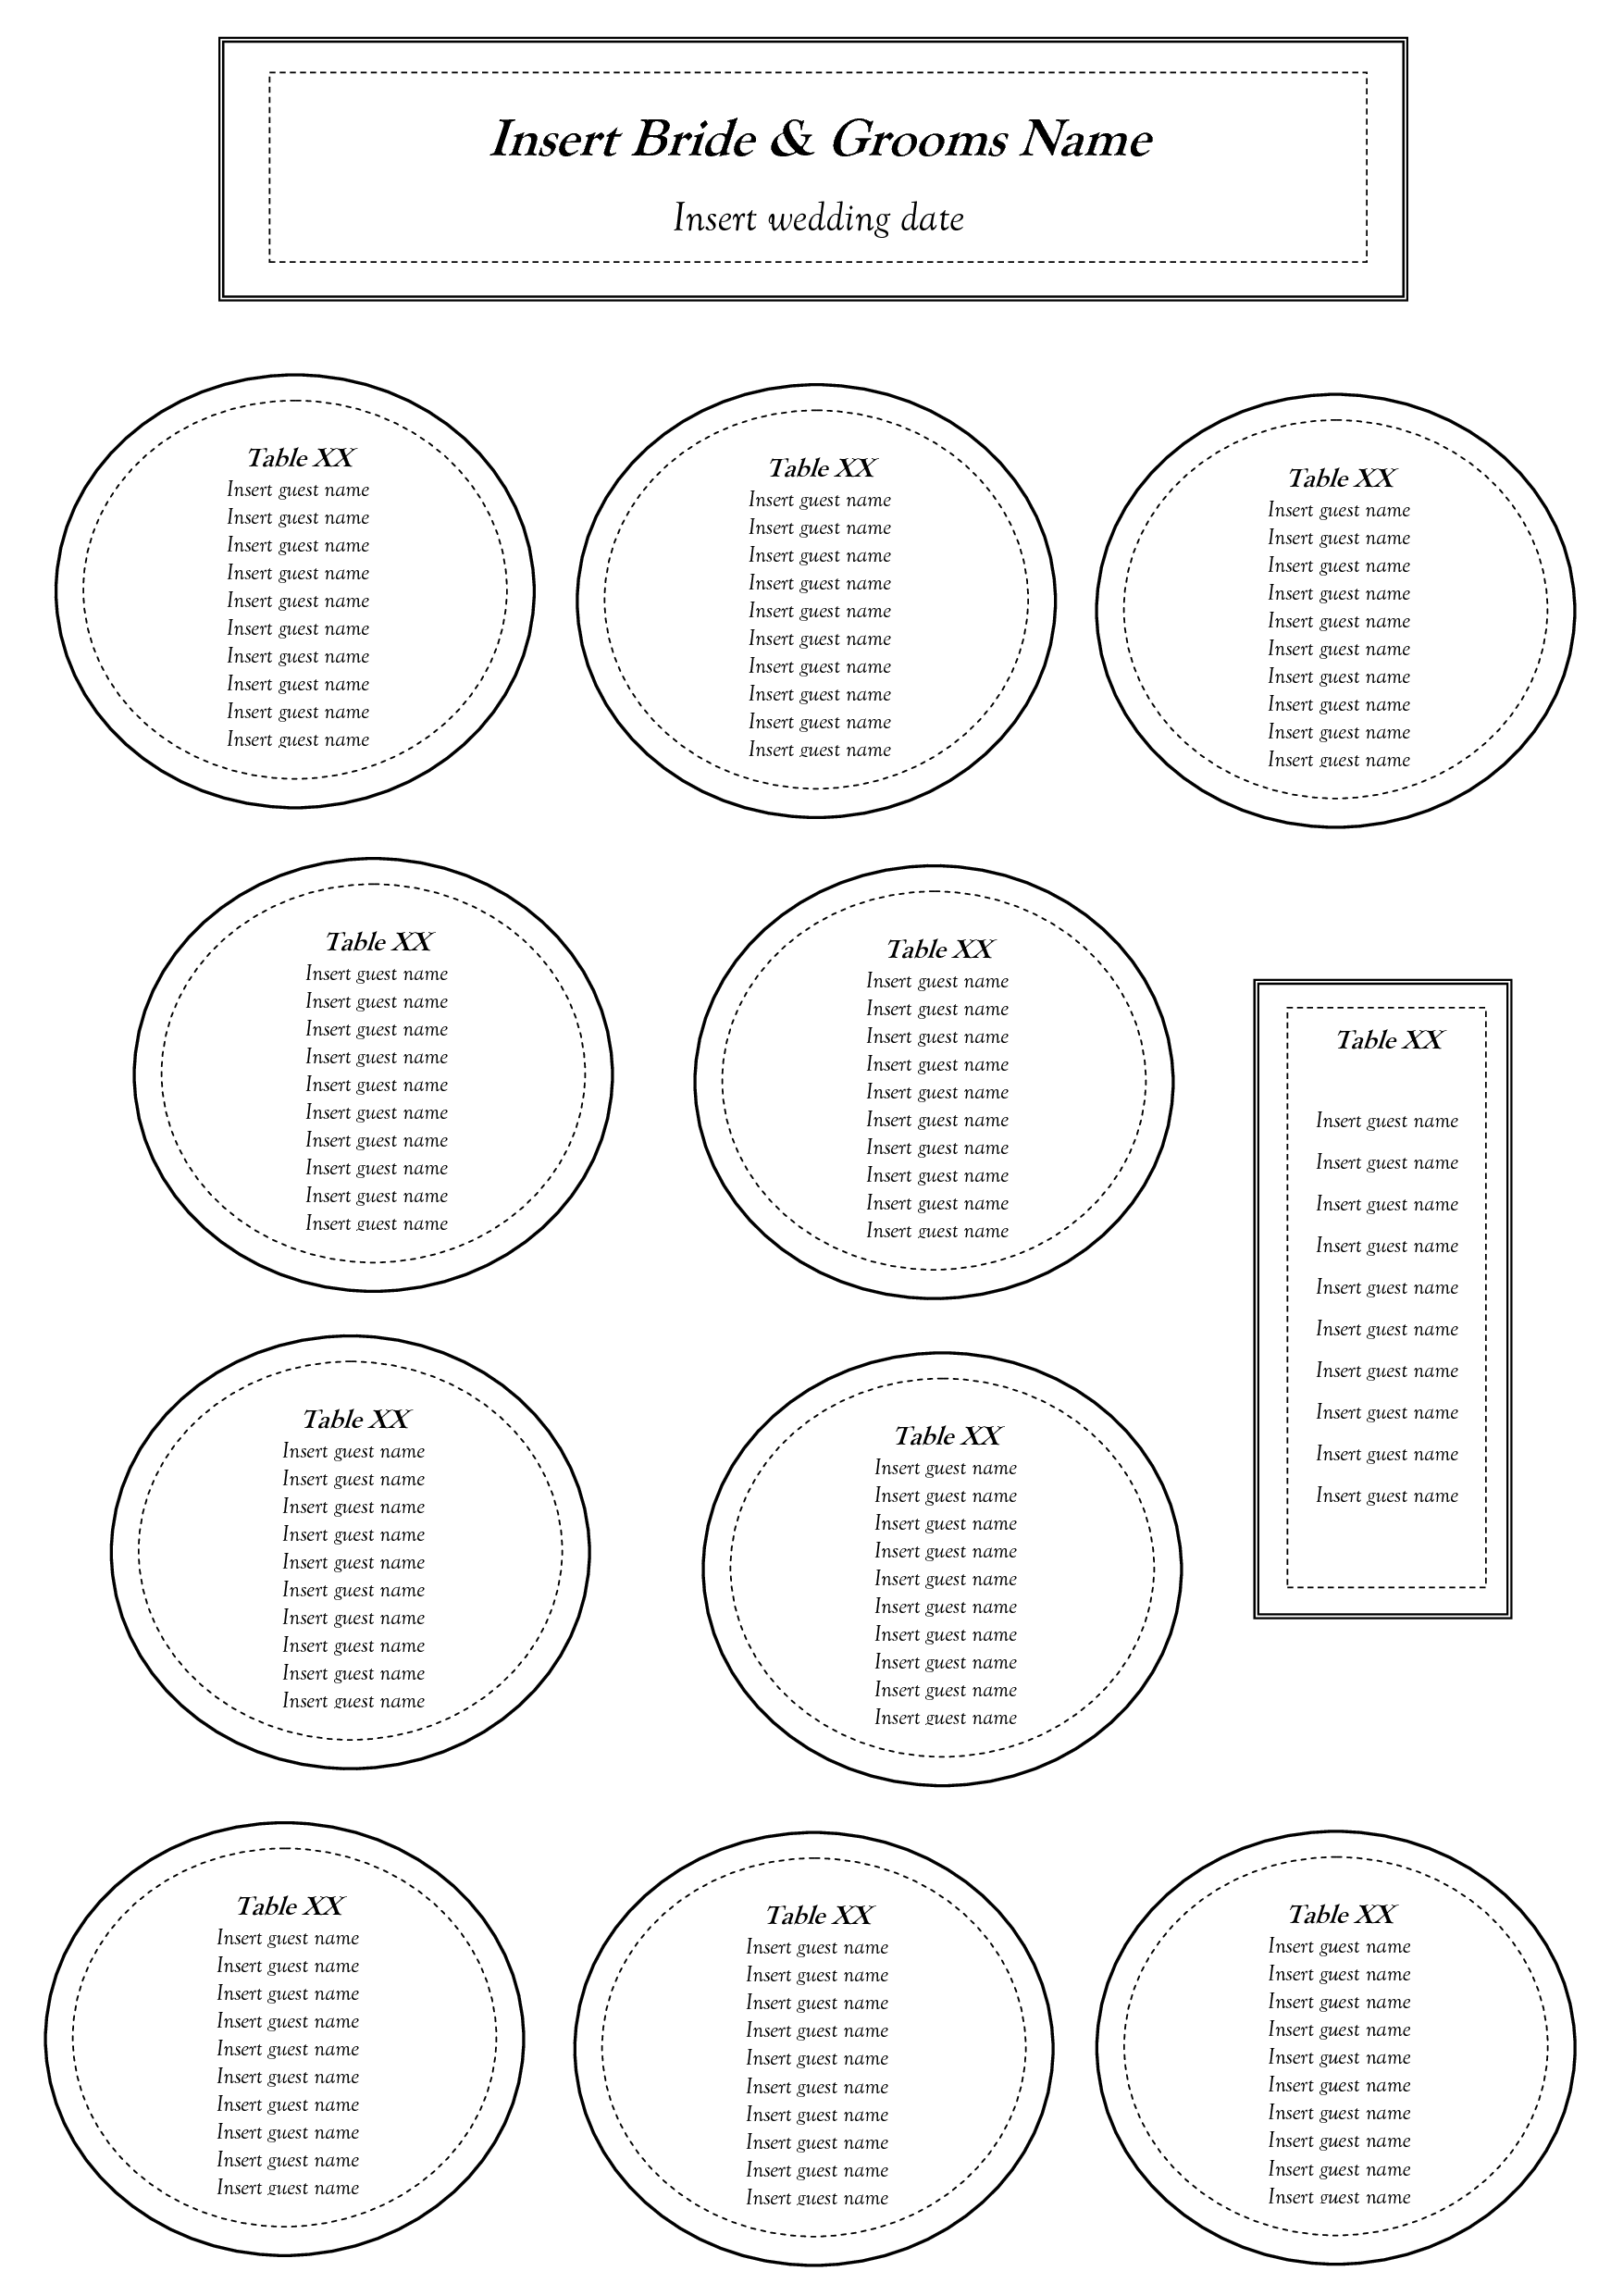 Download Wedding Seating Chart Template Excel Within Wedding Seating Chart Template Excel Sheet